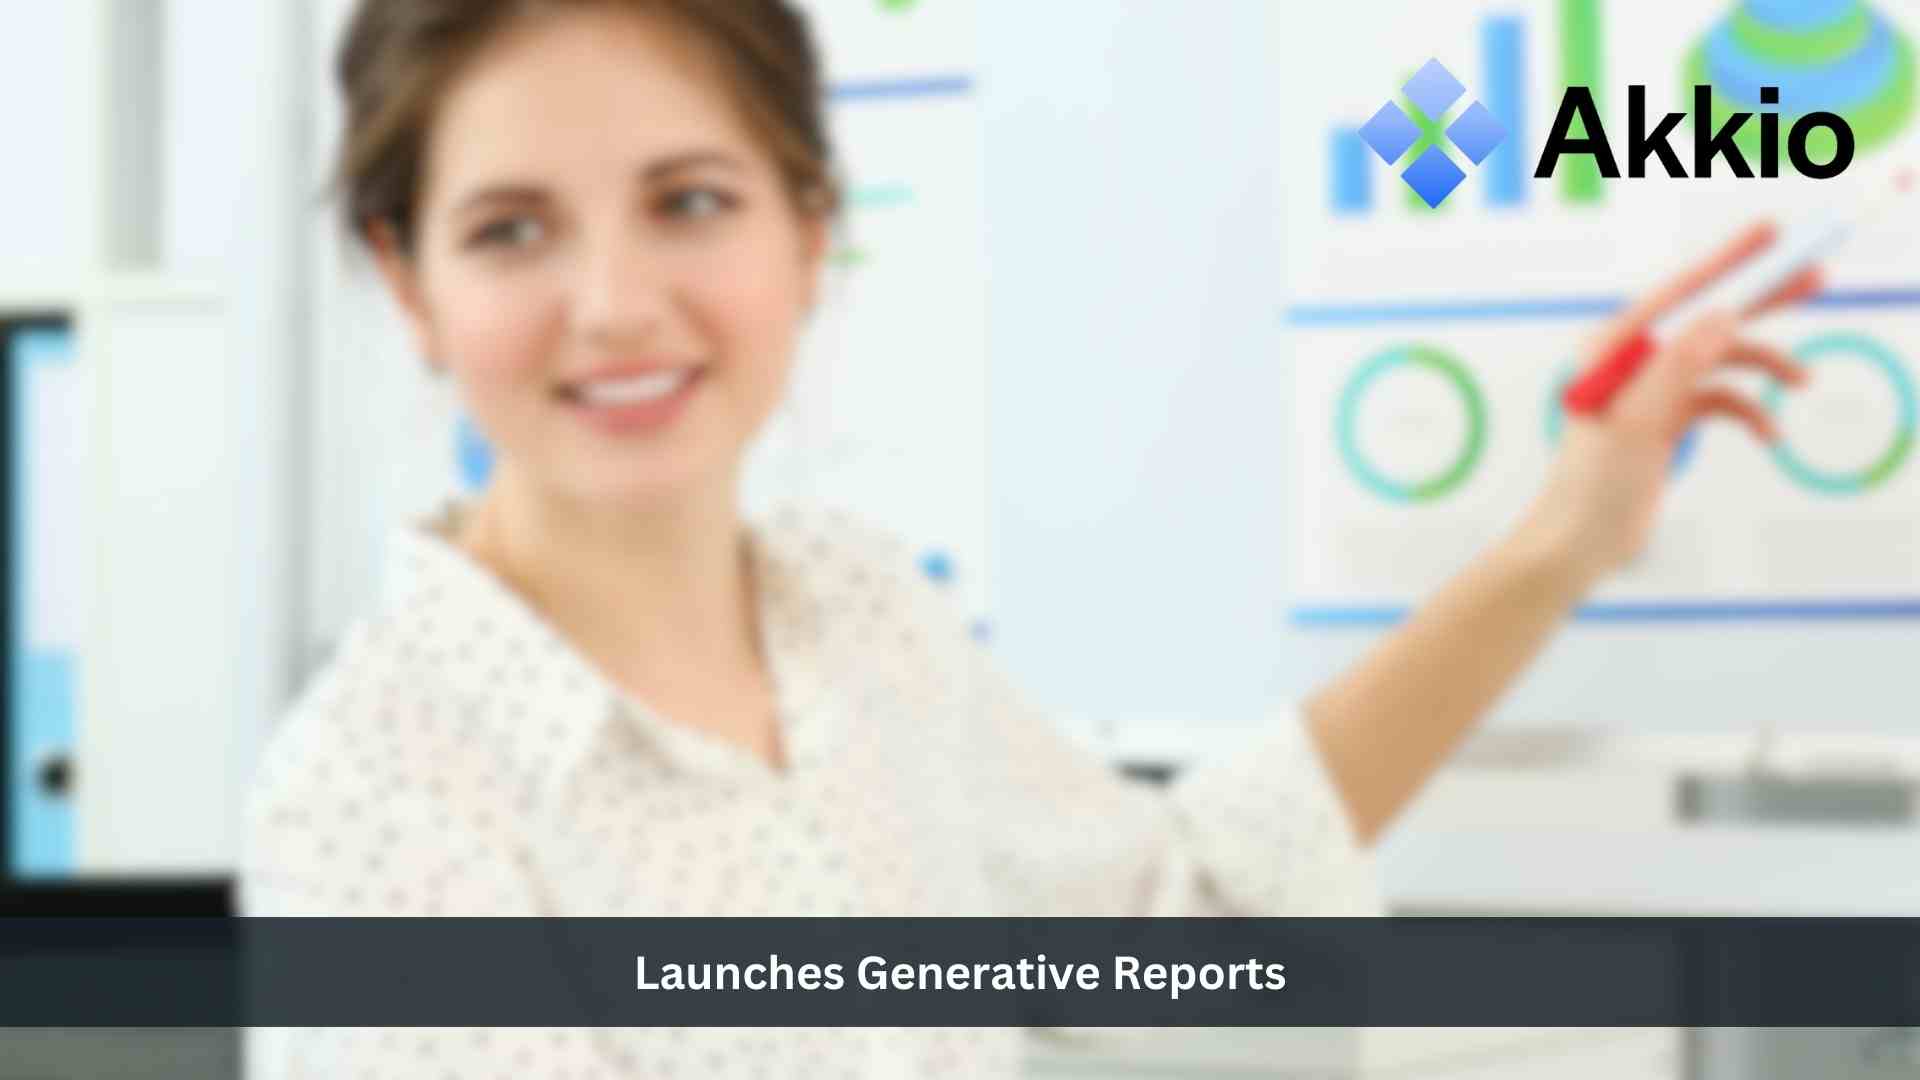 Akkio Launches Generative Reports to Turn Data Into Decisions Instantly